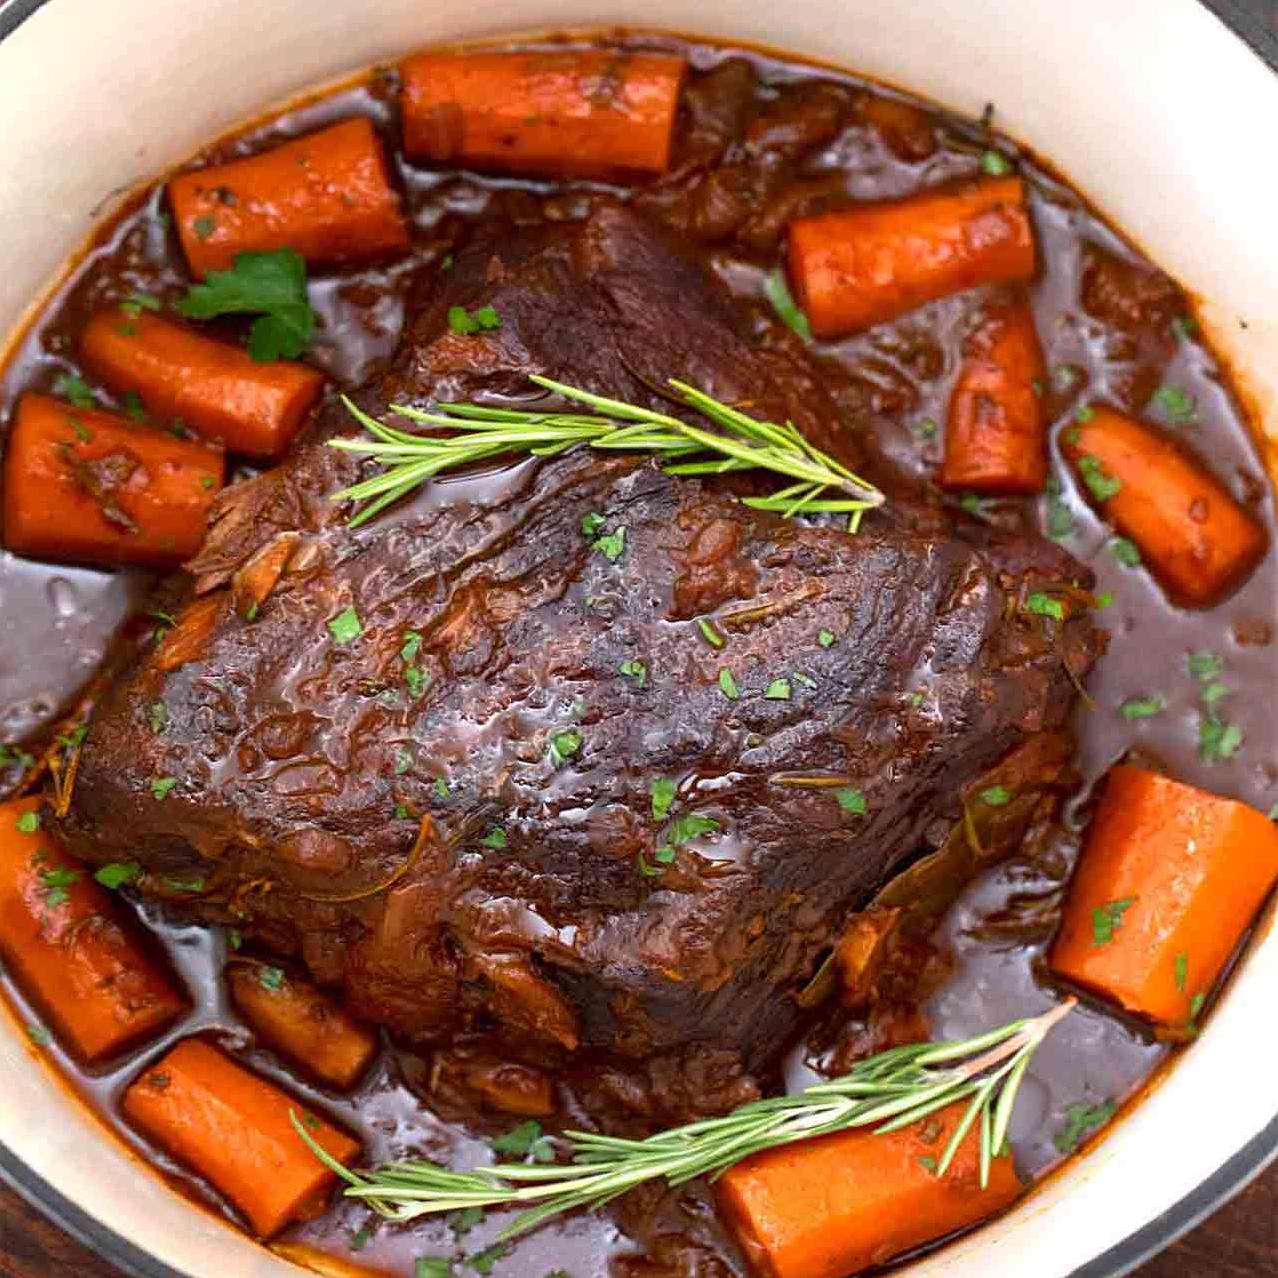  This hearty roast is sure to impress your dinner guests.